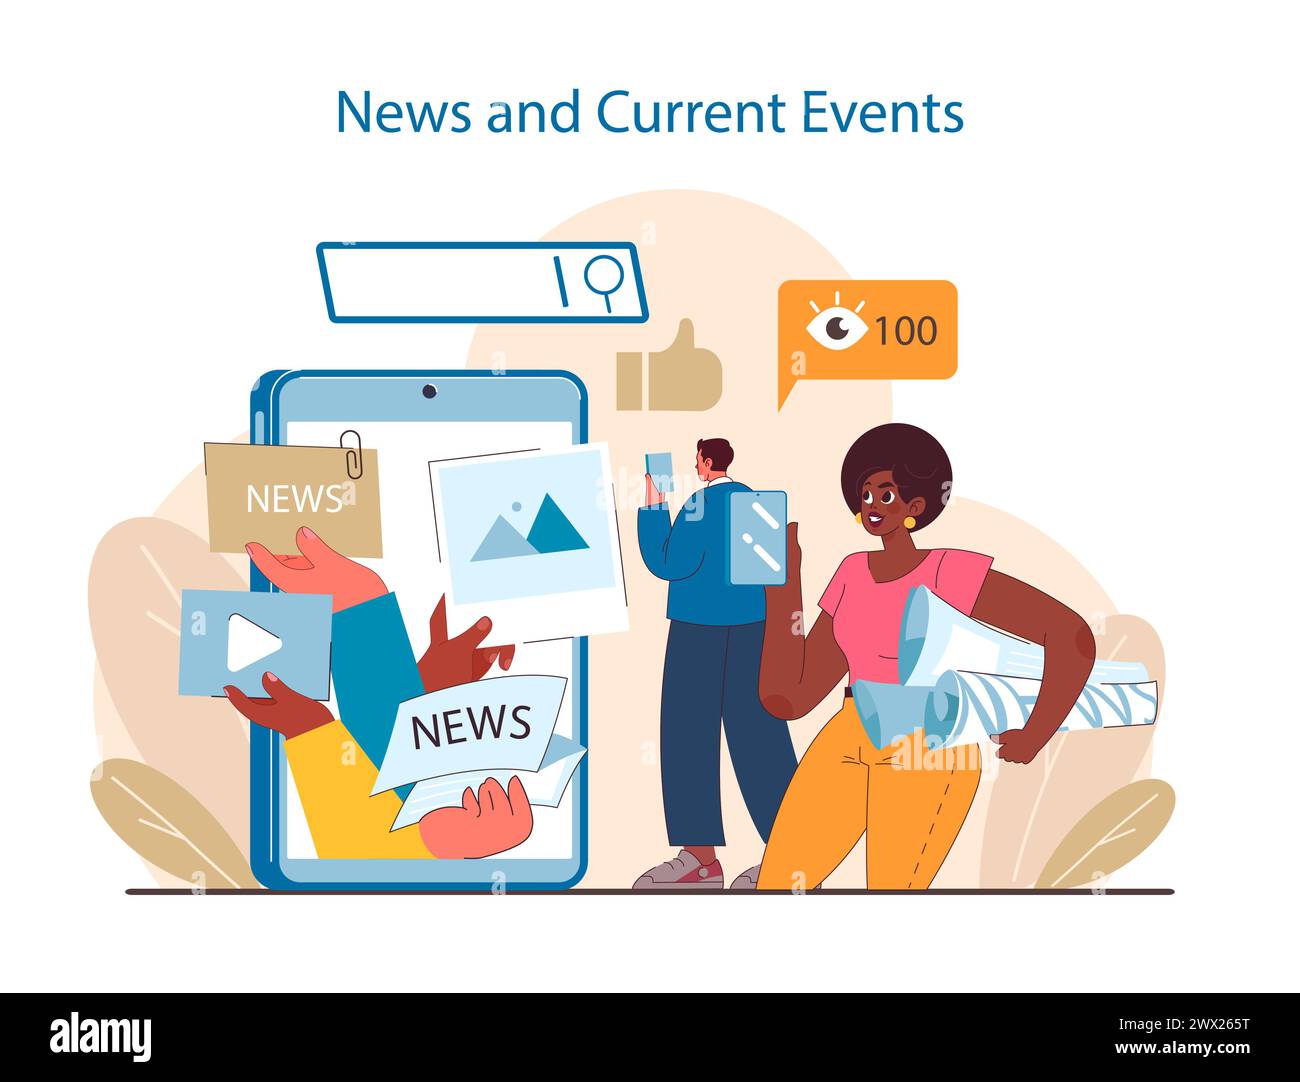 Digital News Consumption concept. Users interact with current events through various digital formats. A blend of information and technology in modern media. Flat vector illustration. Stock Vector